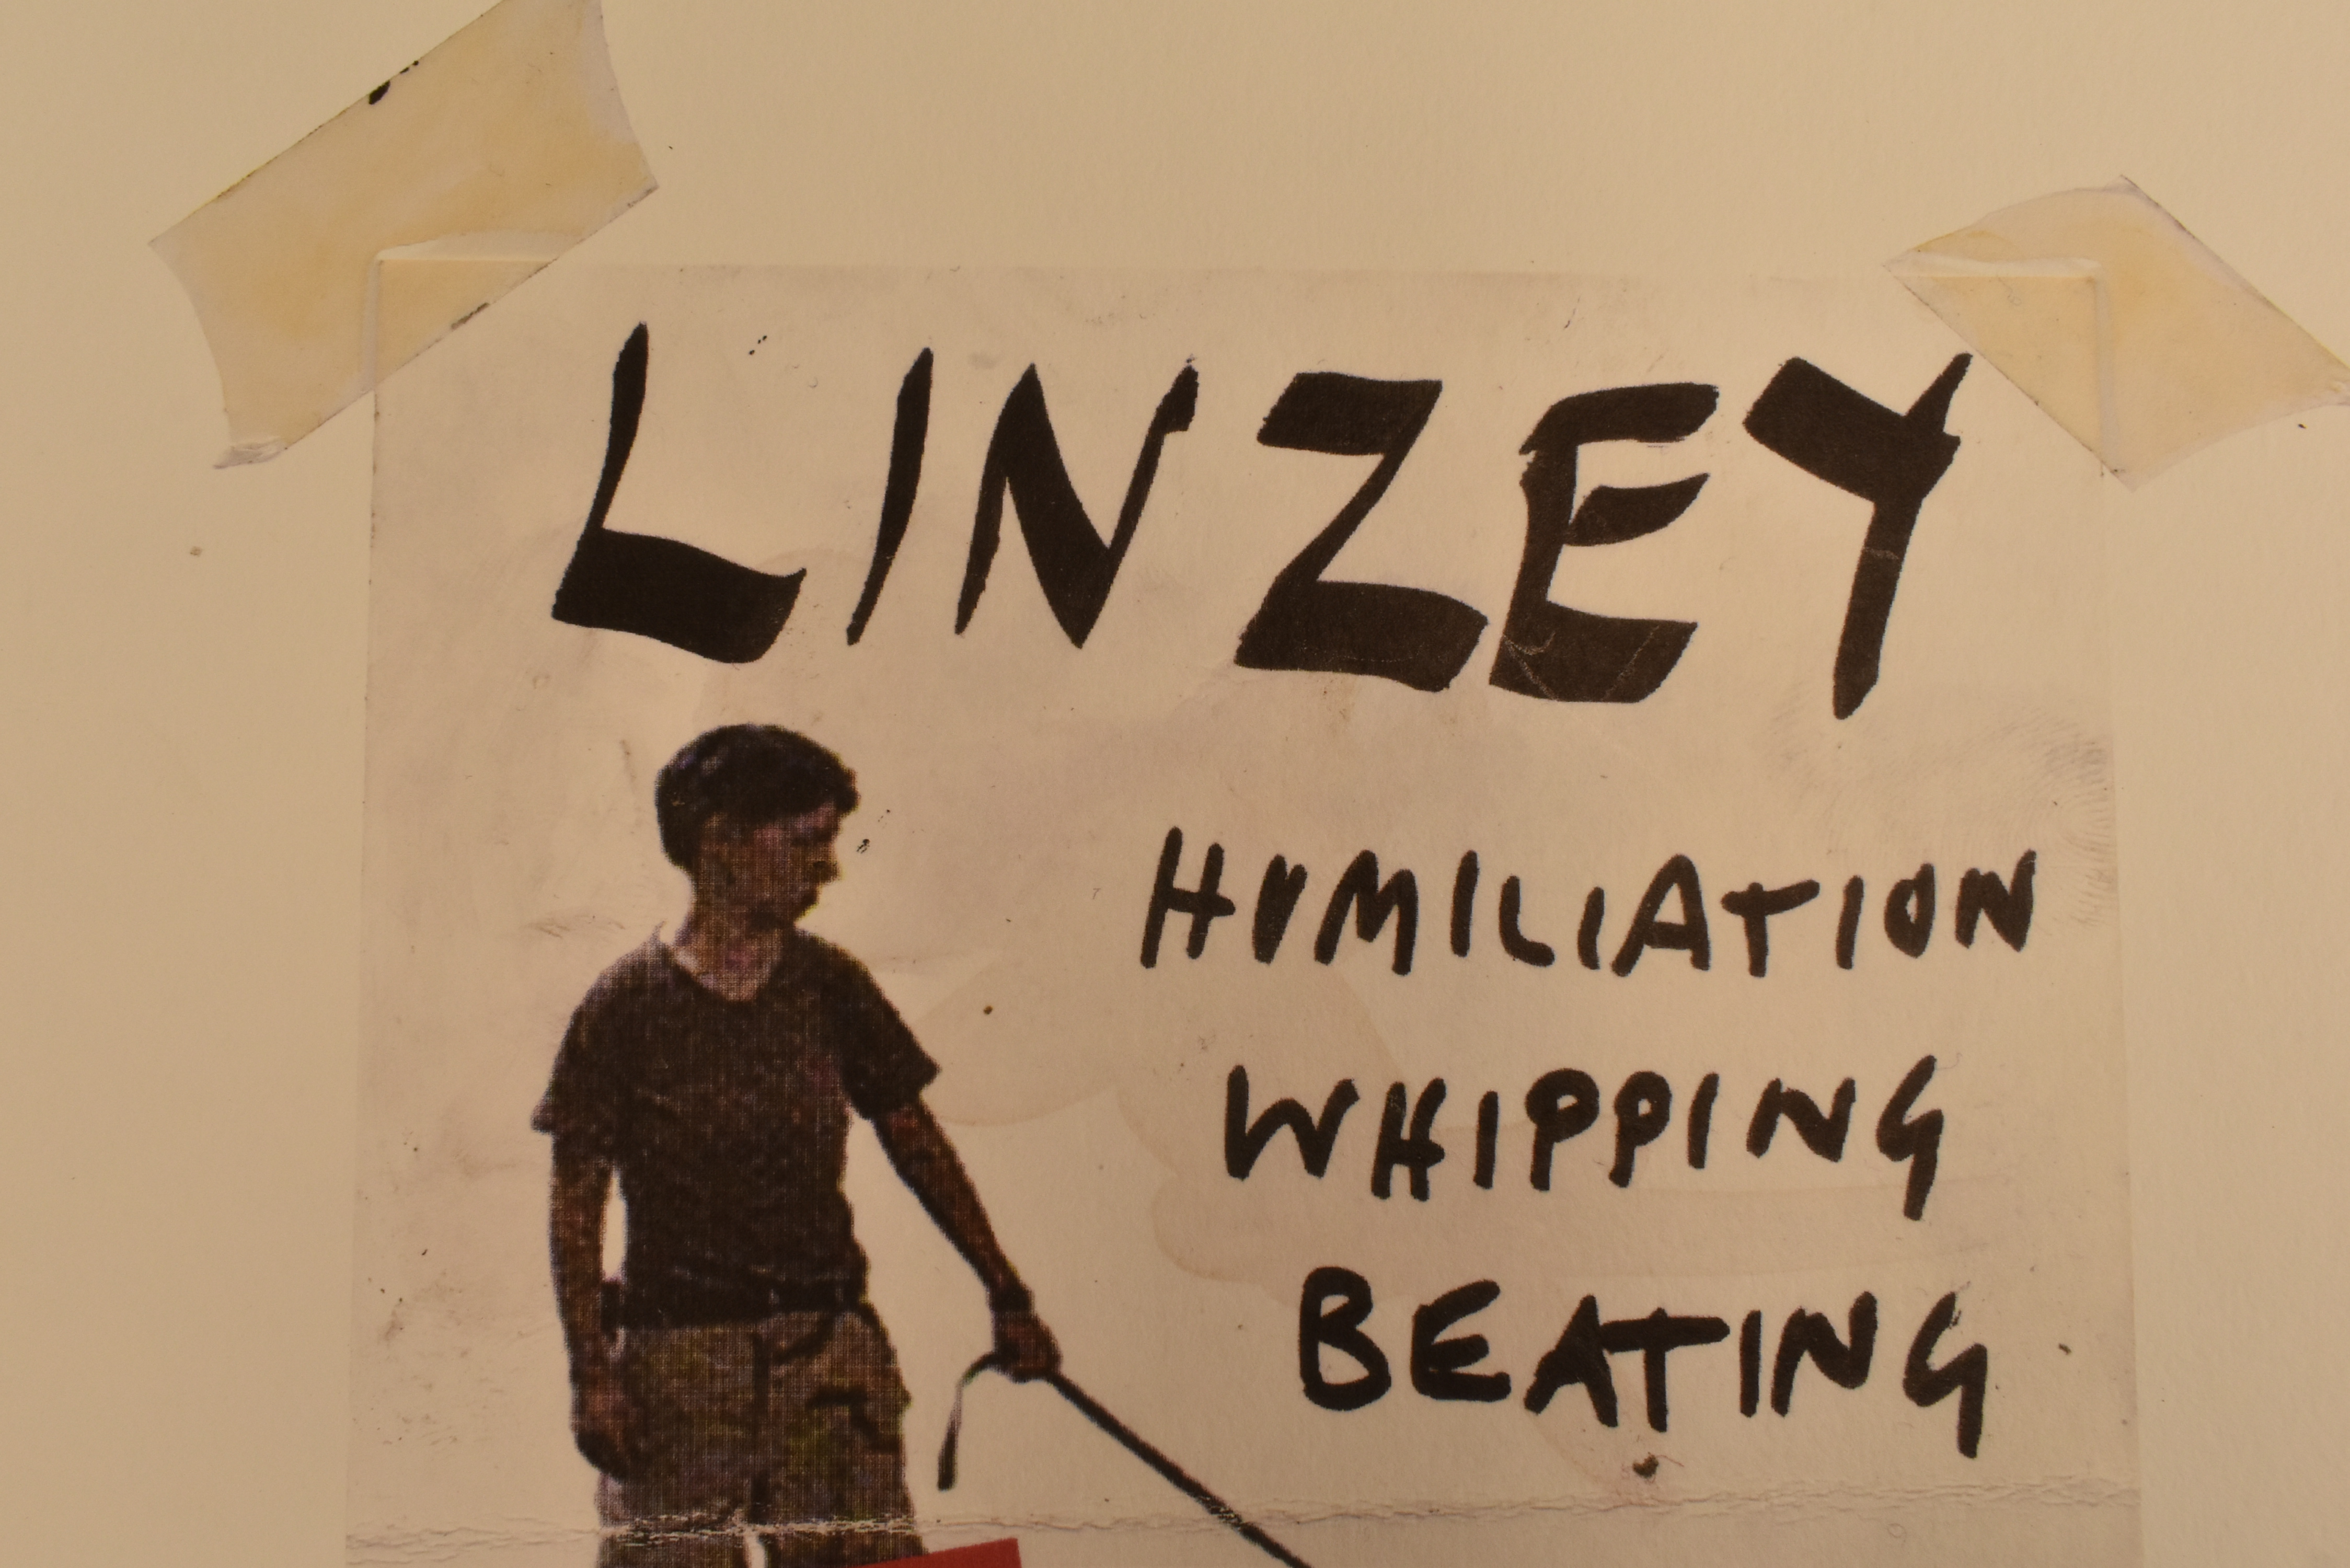 LINZEY - HUMILIATION, WHIPPING, BEATING - Image 3 of 6